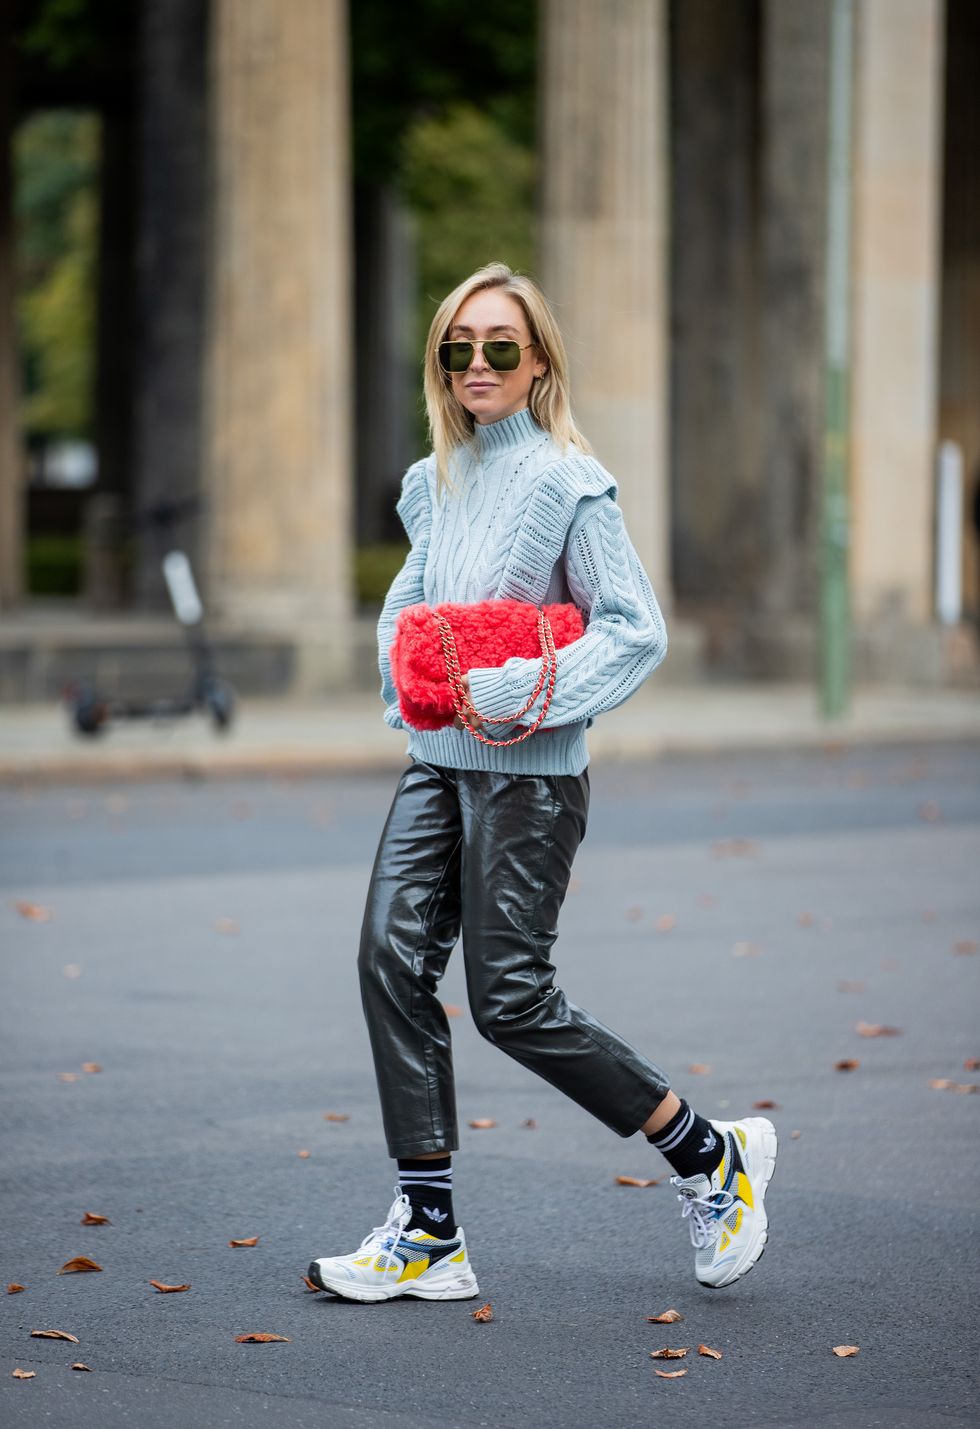 berlin, germany   october 13 sonia lyson is seen wearing axel arigato sneaker, black socks with logo print adidas, black pants and blue knit edited, red chanel bag, sunglasses bottega veneta on october 13, 2020 in berlin, germany photo by christian vieriggetty images